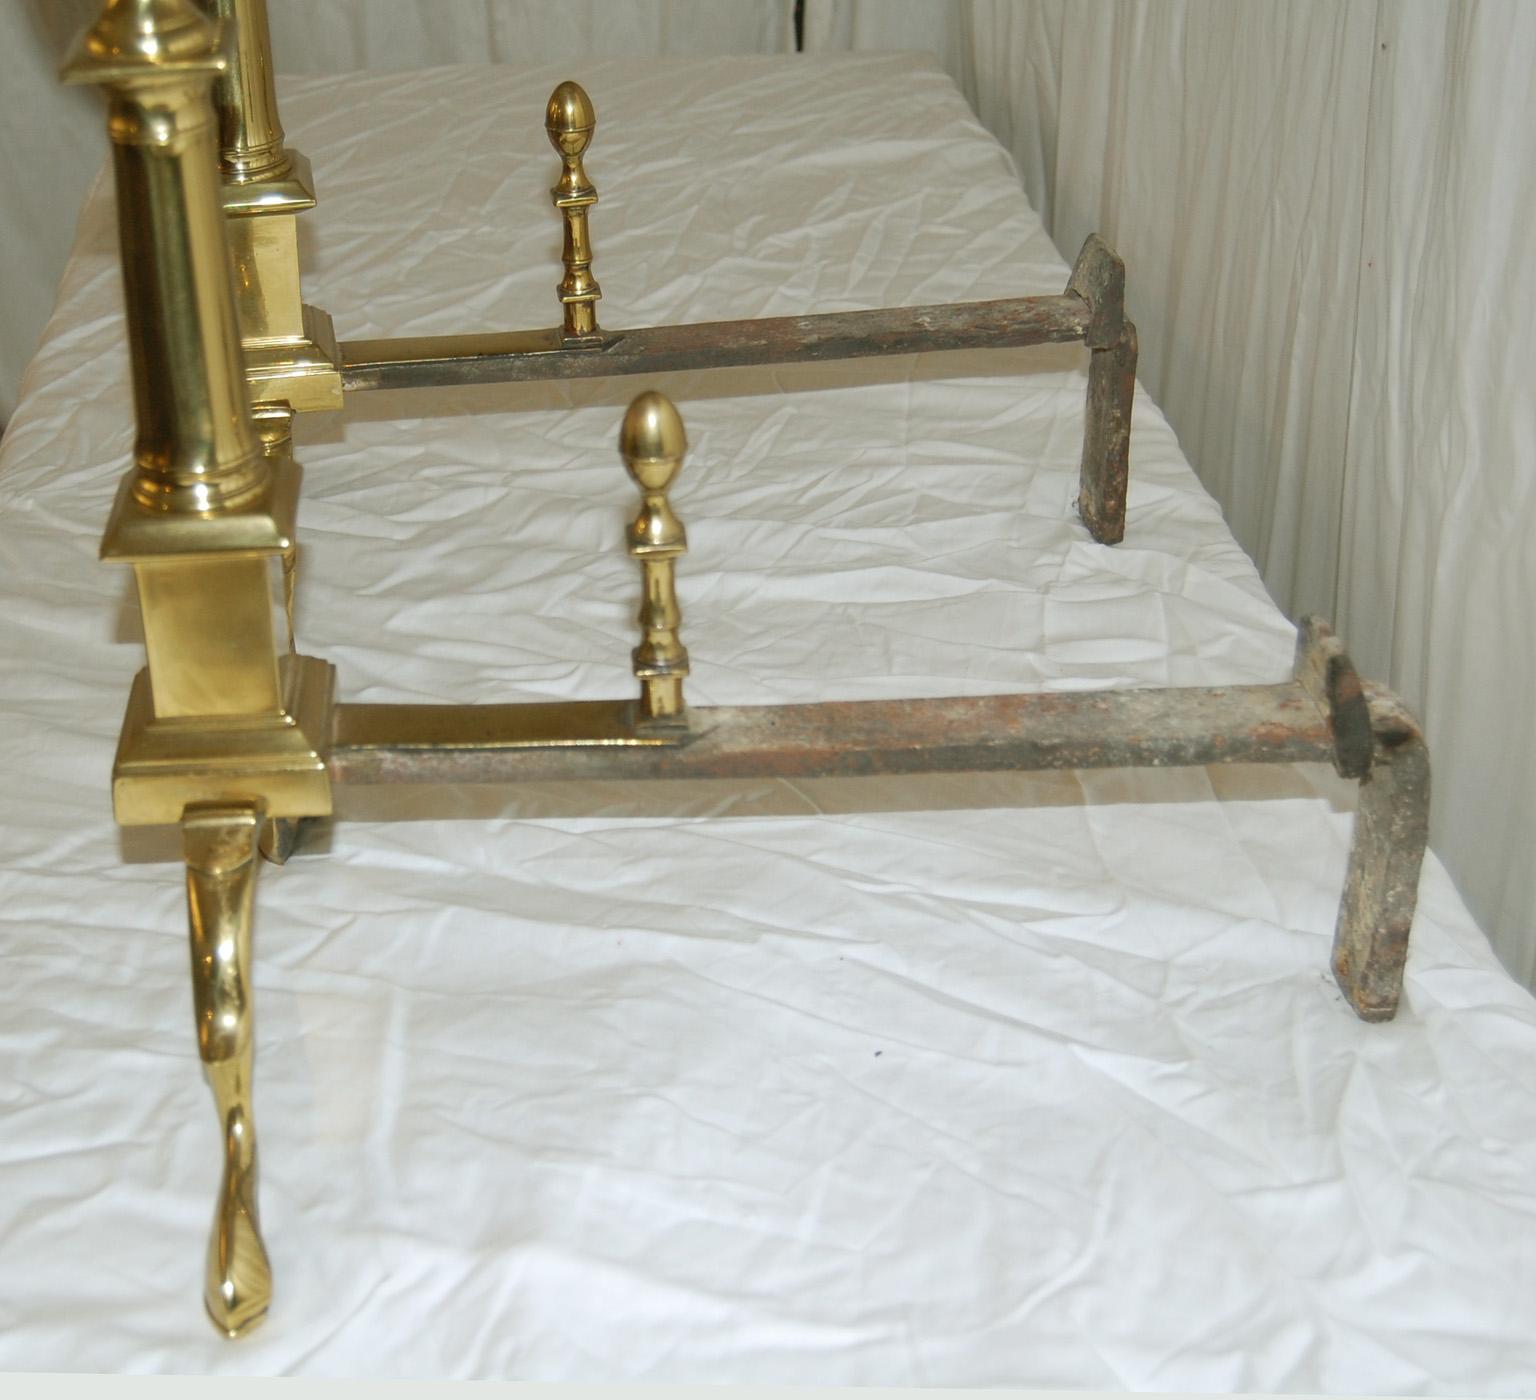 American Federal Brass Lemon Top Andirons with Cabriole Legs and Slipper Feet In Good Condition For Sale In Wells, ME